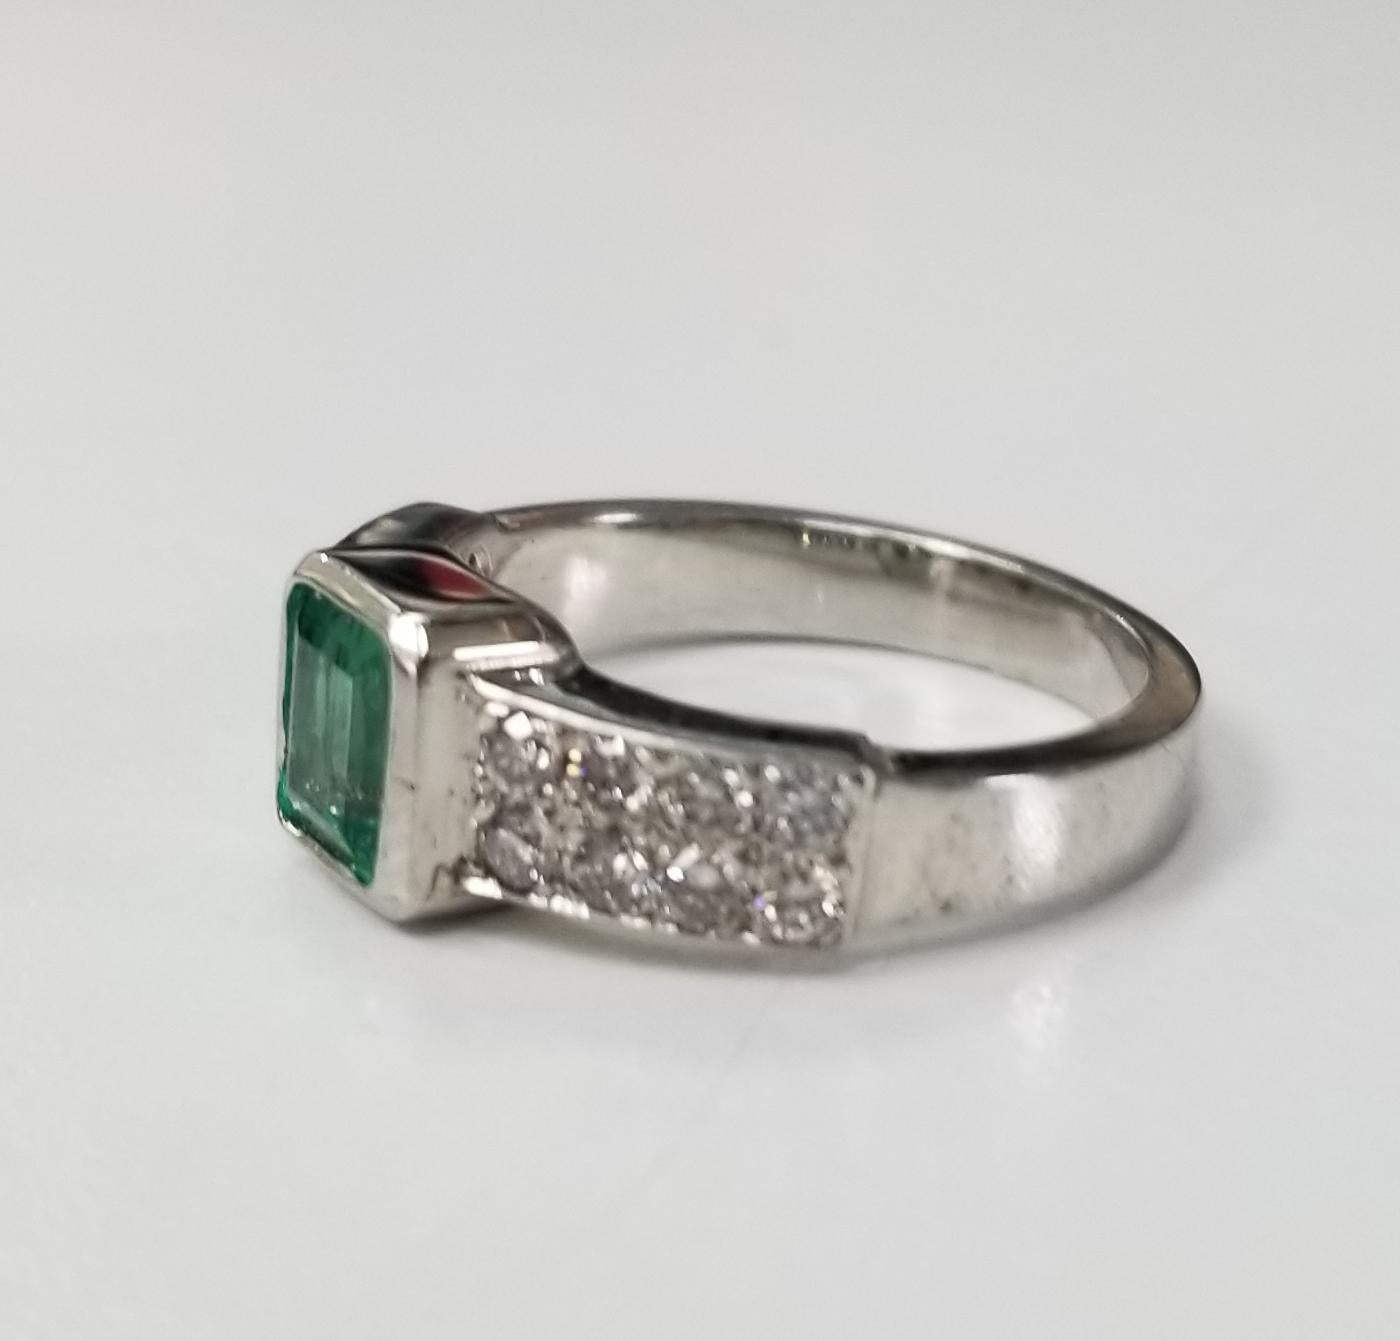 14k white gold emerald and diamond ring, containing 1 emerald cut emerald weighing .76cts. and 16 round full cut diamonds of very fine quality weighing .55pts.  This ring is a size 6.5 but we will size to fit for free.